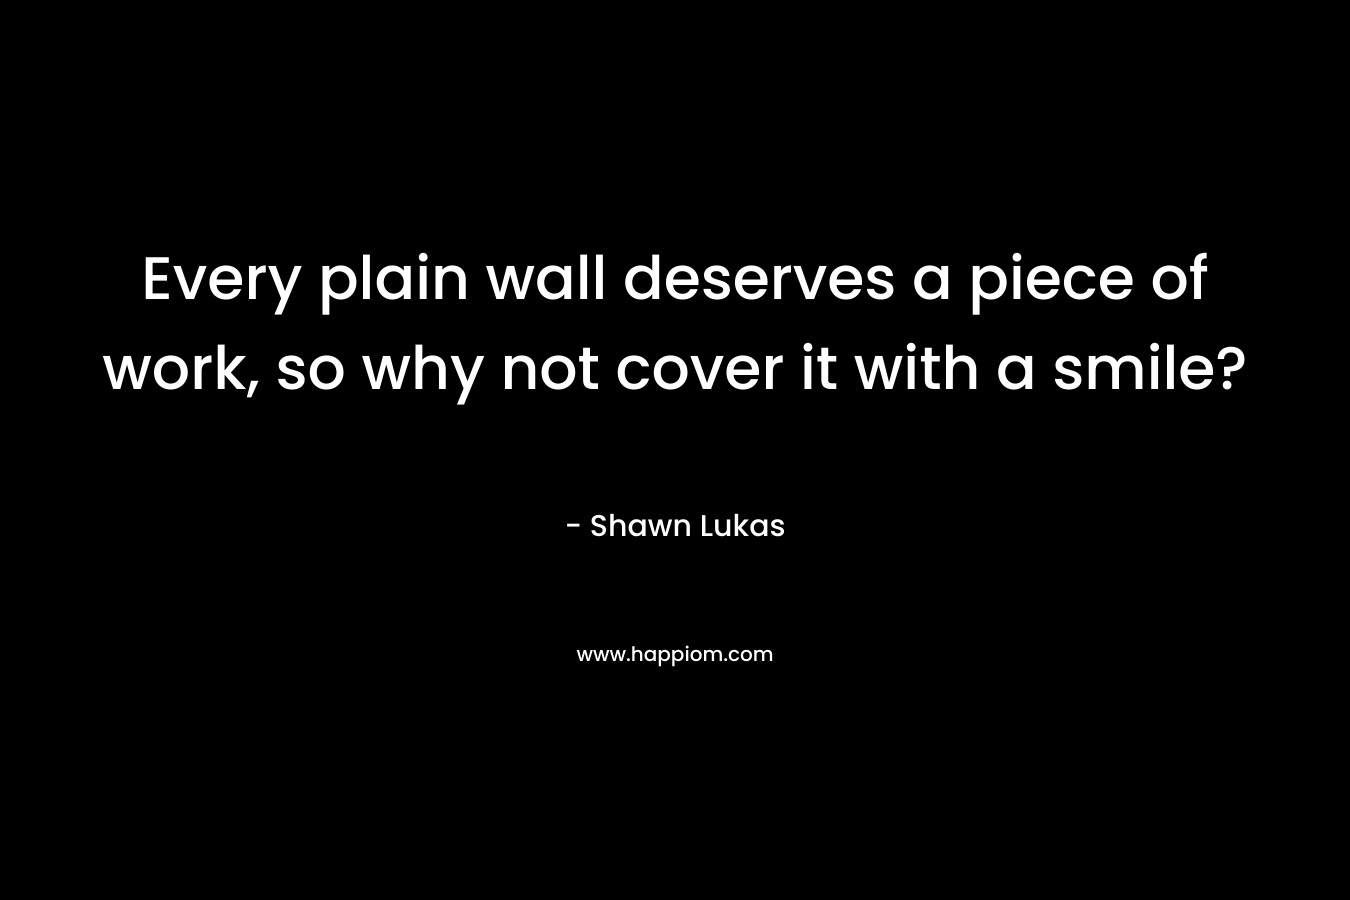 Every plain wall deserves a piece of work, so why not cover it with a smile?